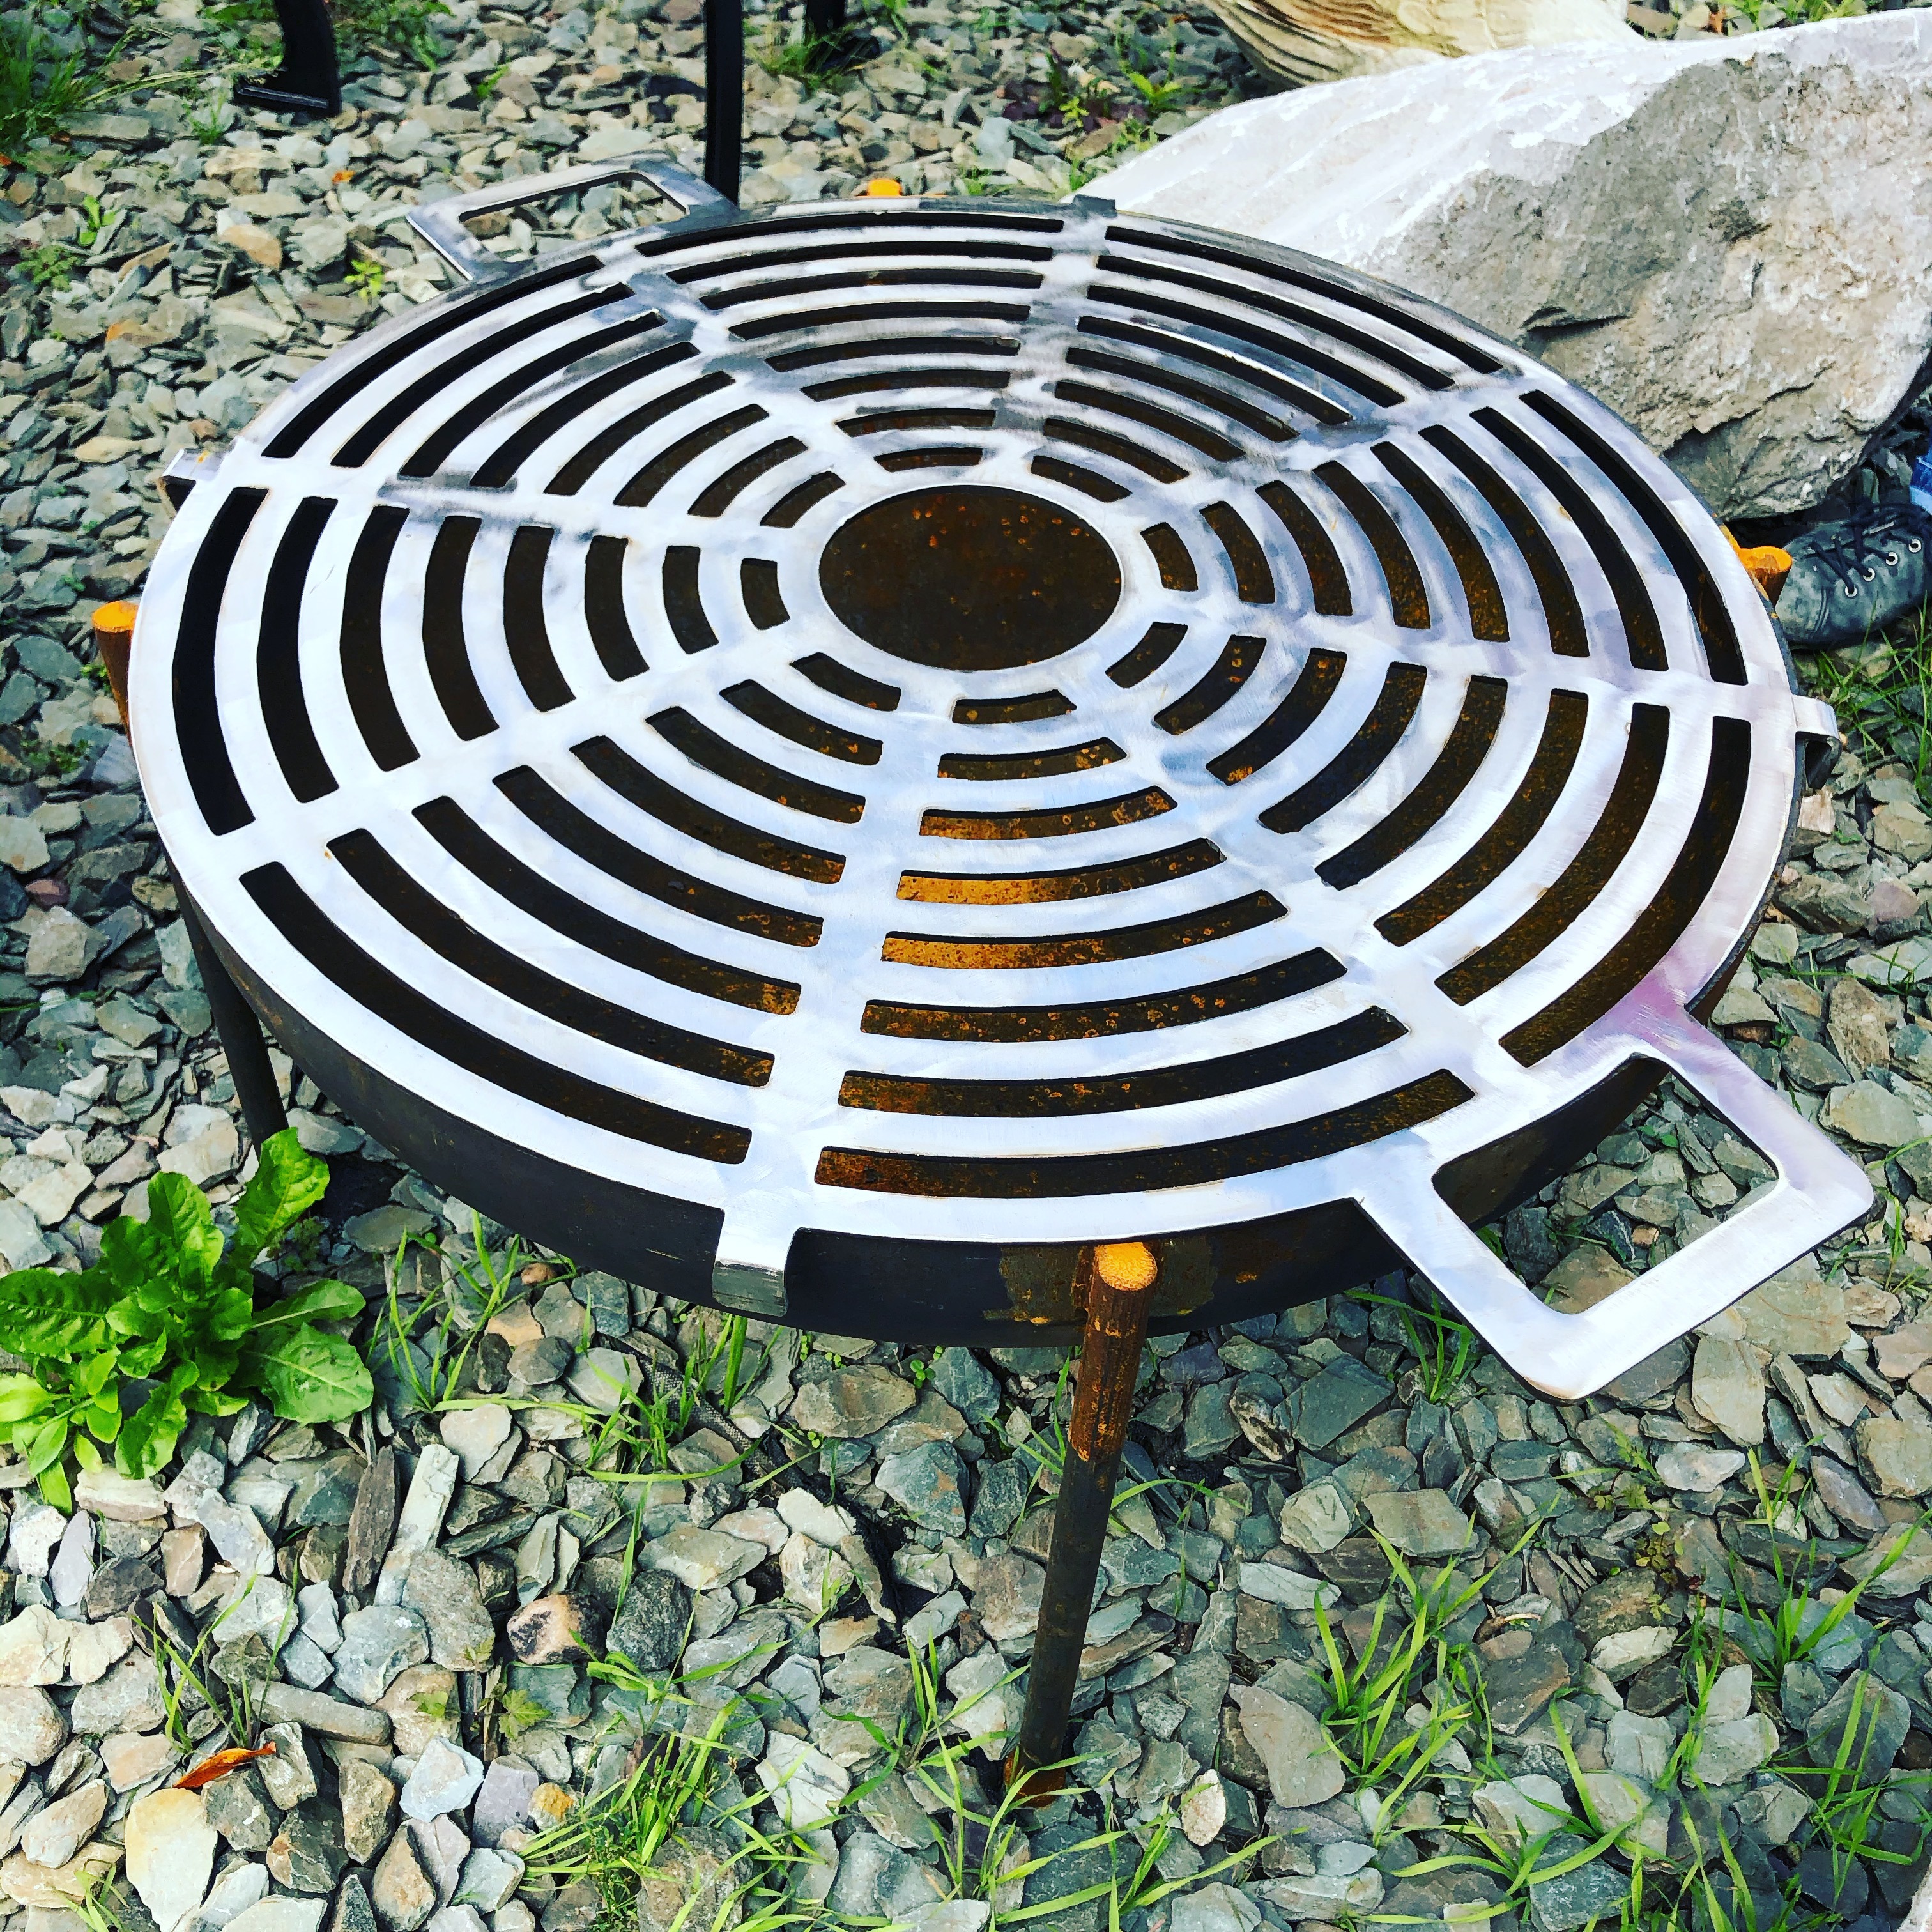 Stainless Steel Cooking Grill, Heavy Duty Fire Pit Cooking Grate